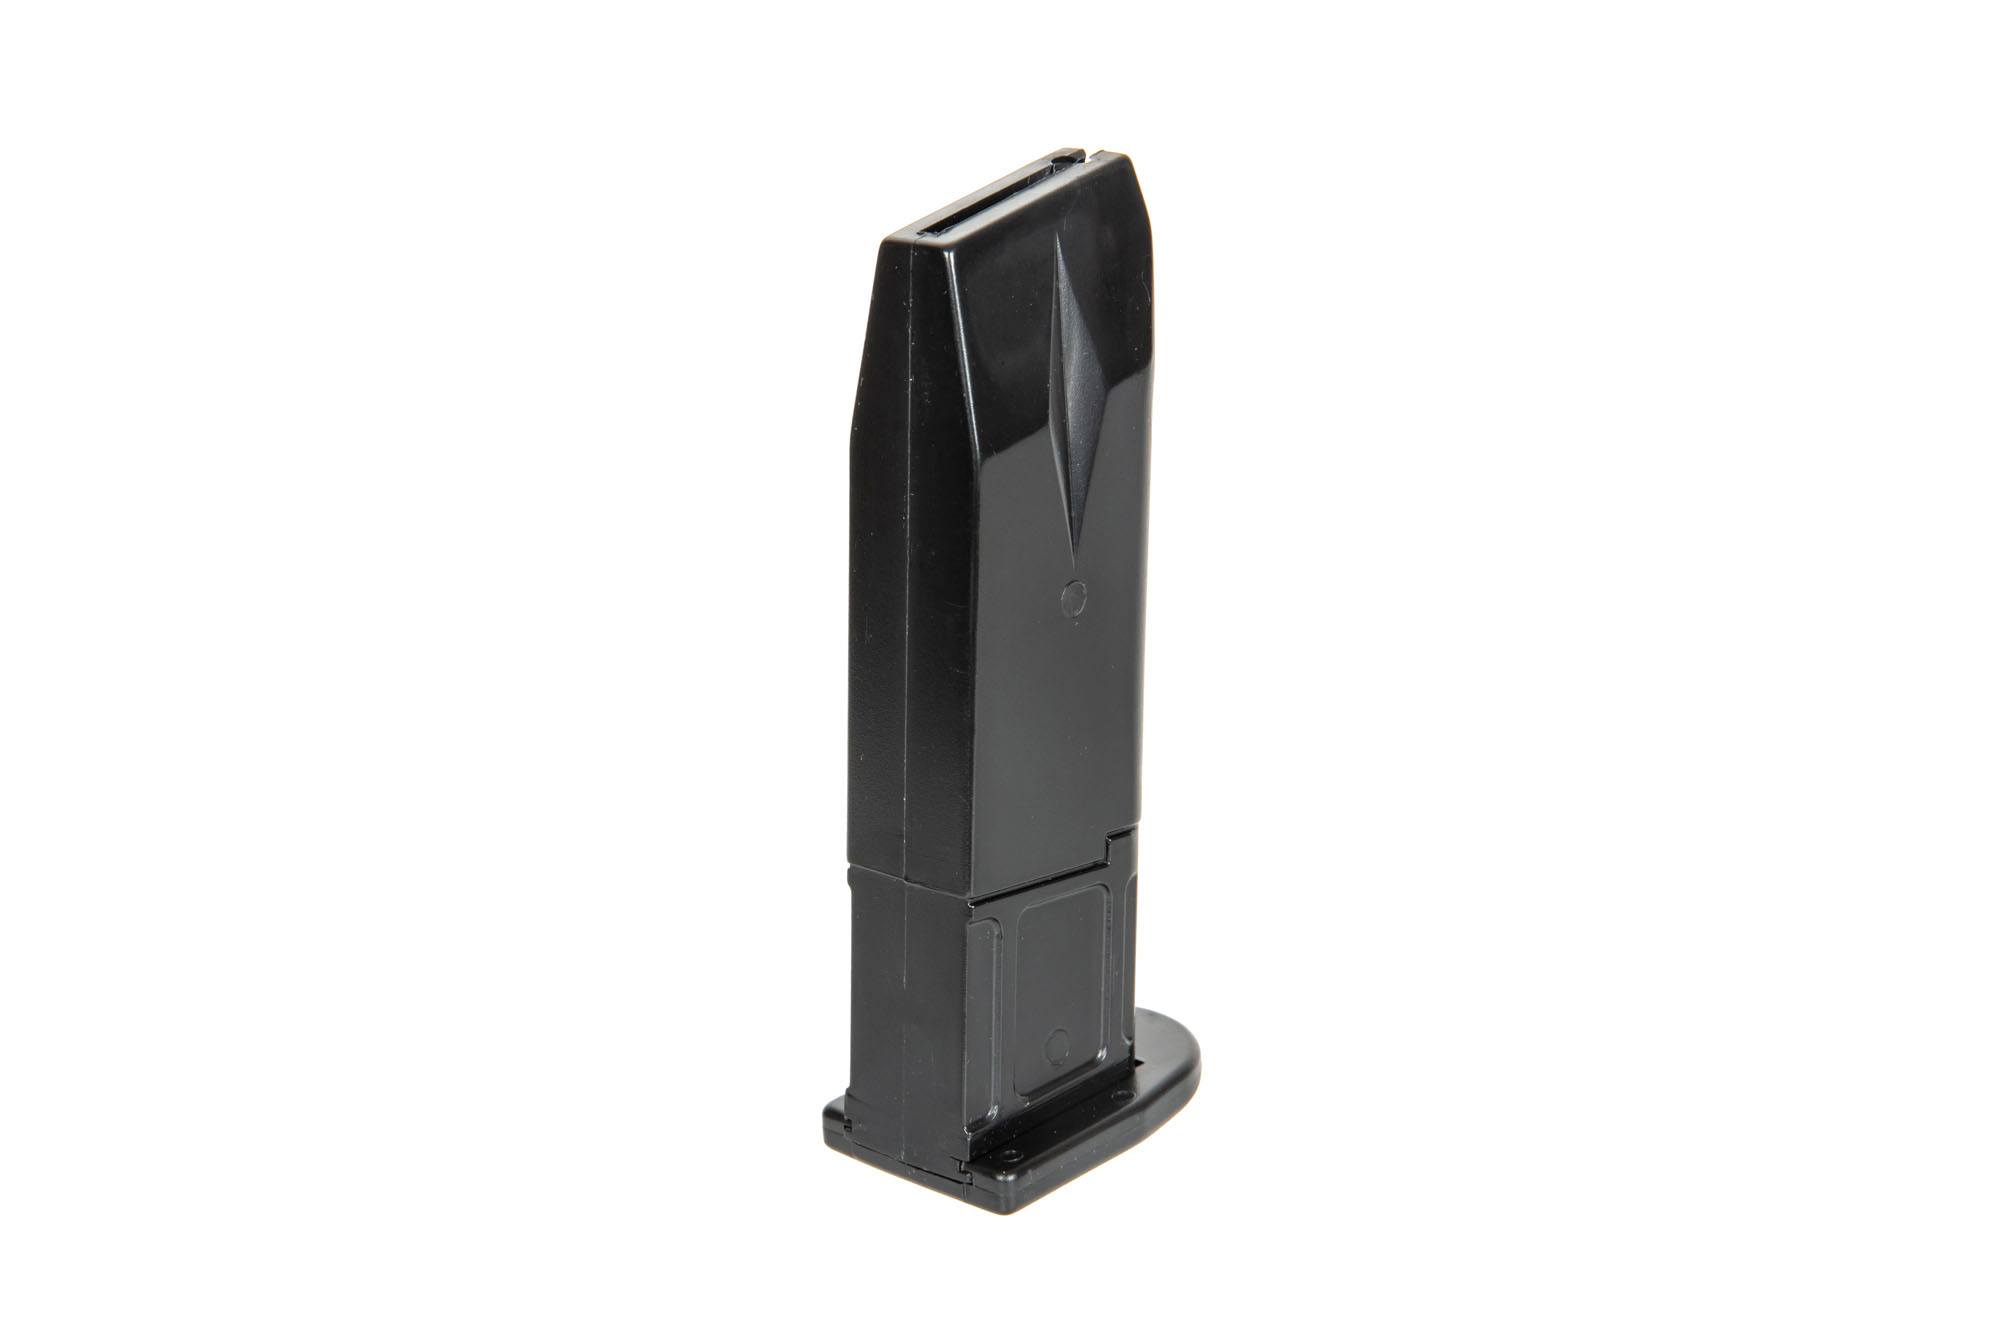 12 BB Magazine for P99-Umarex Spring Action Pistol Replica by Umarex on Airsoft Mania Europe